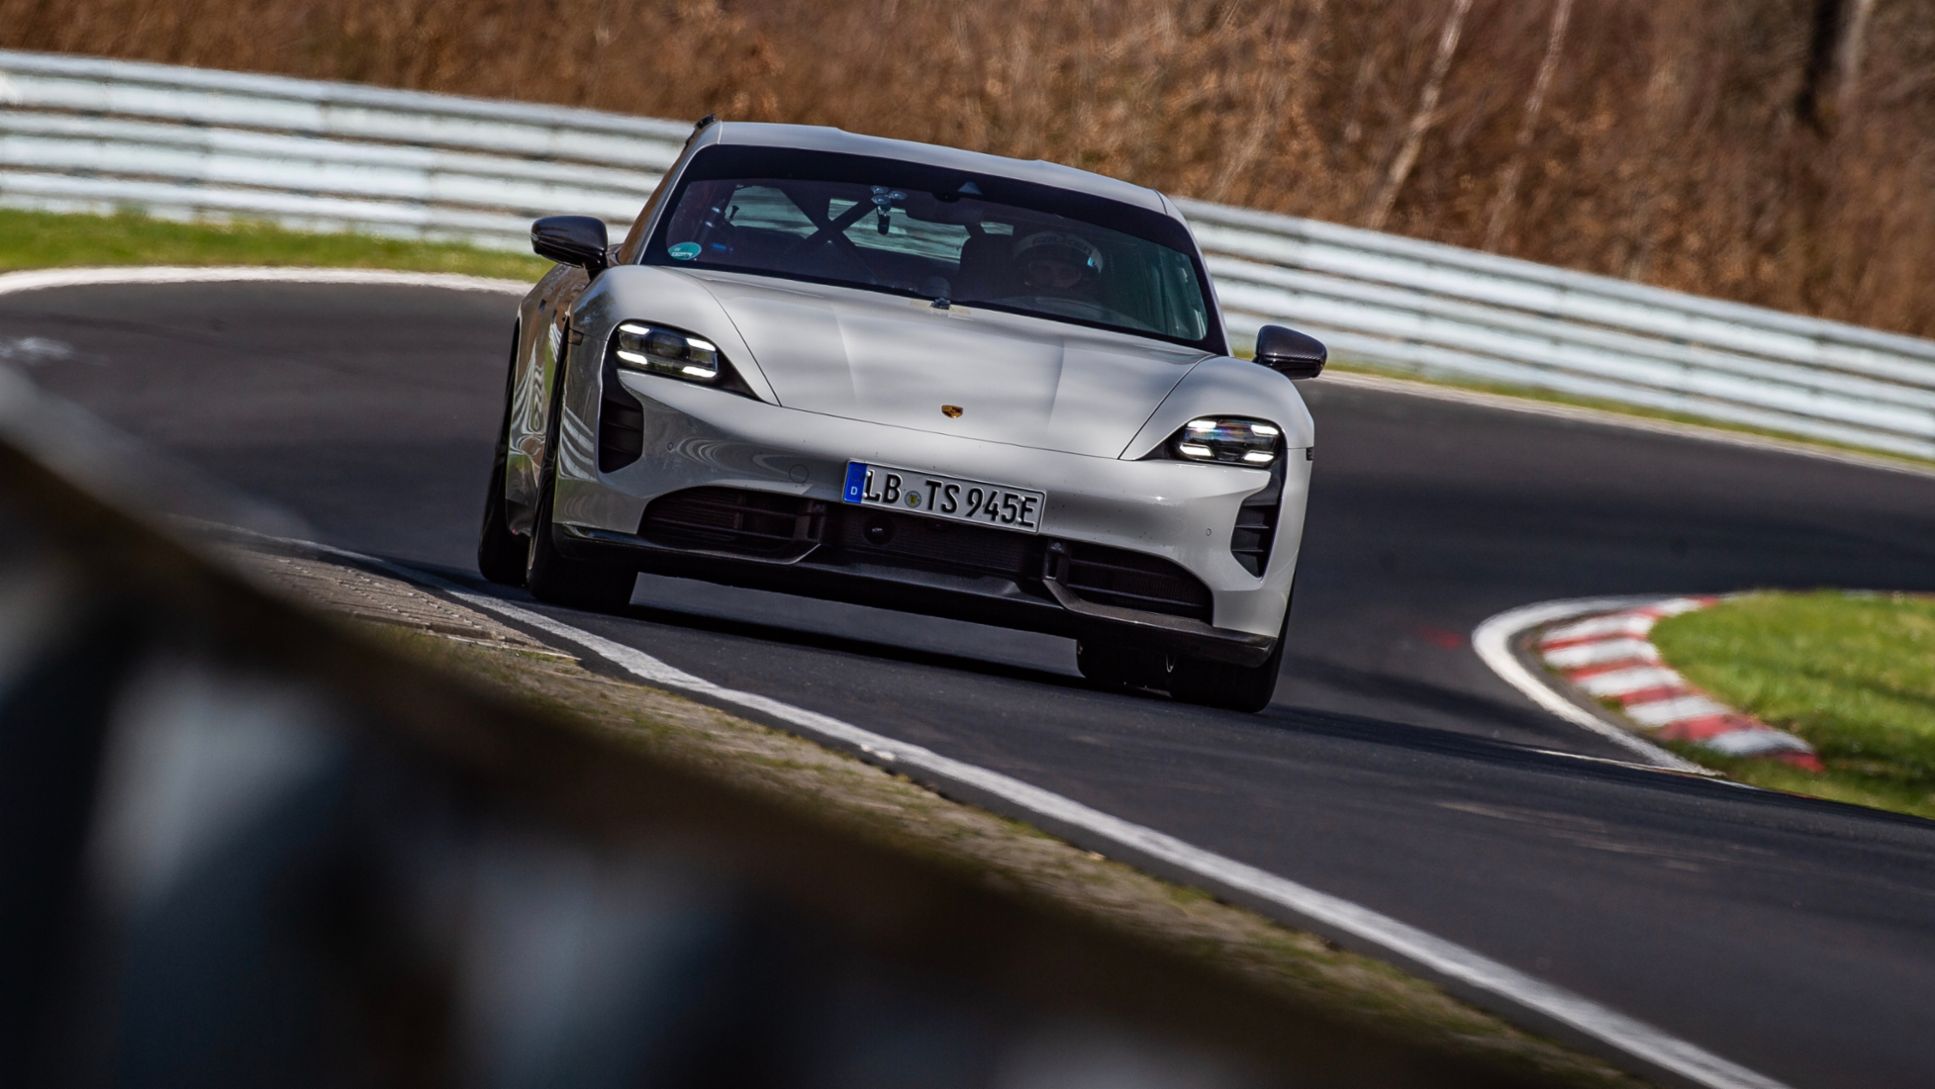 Porsche Taycan shows emerging leadership in new drag race videos